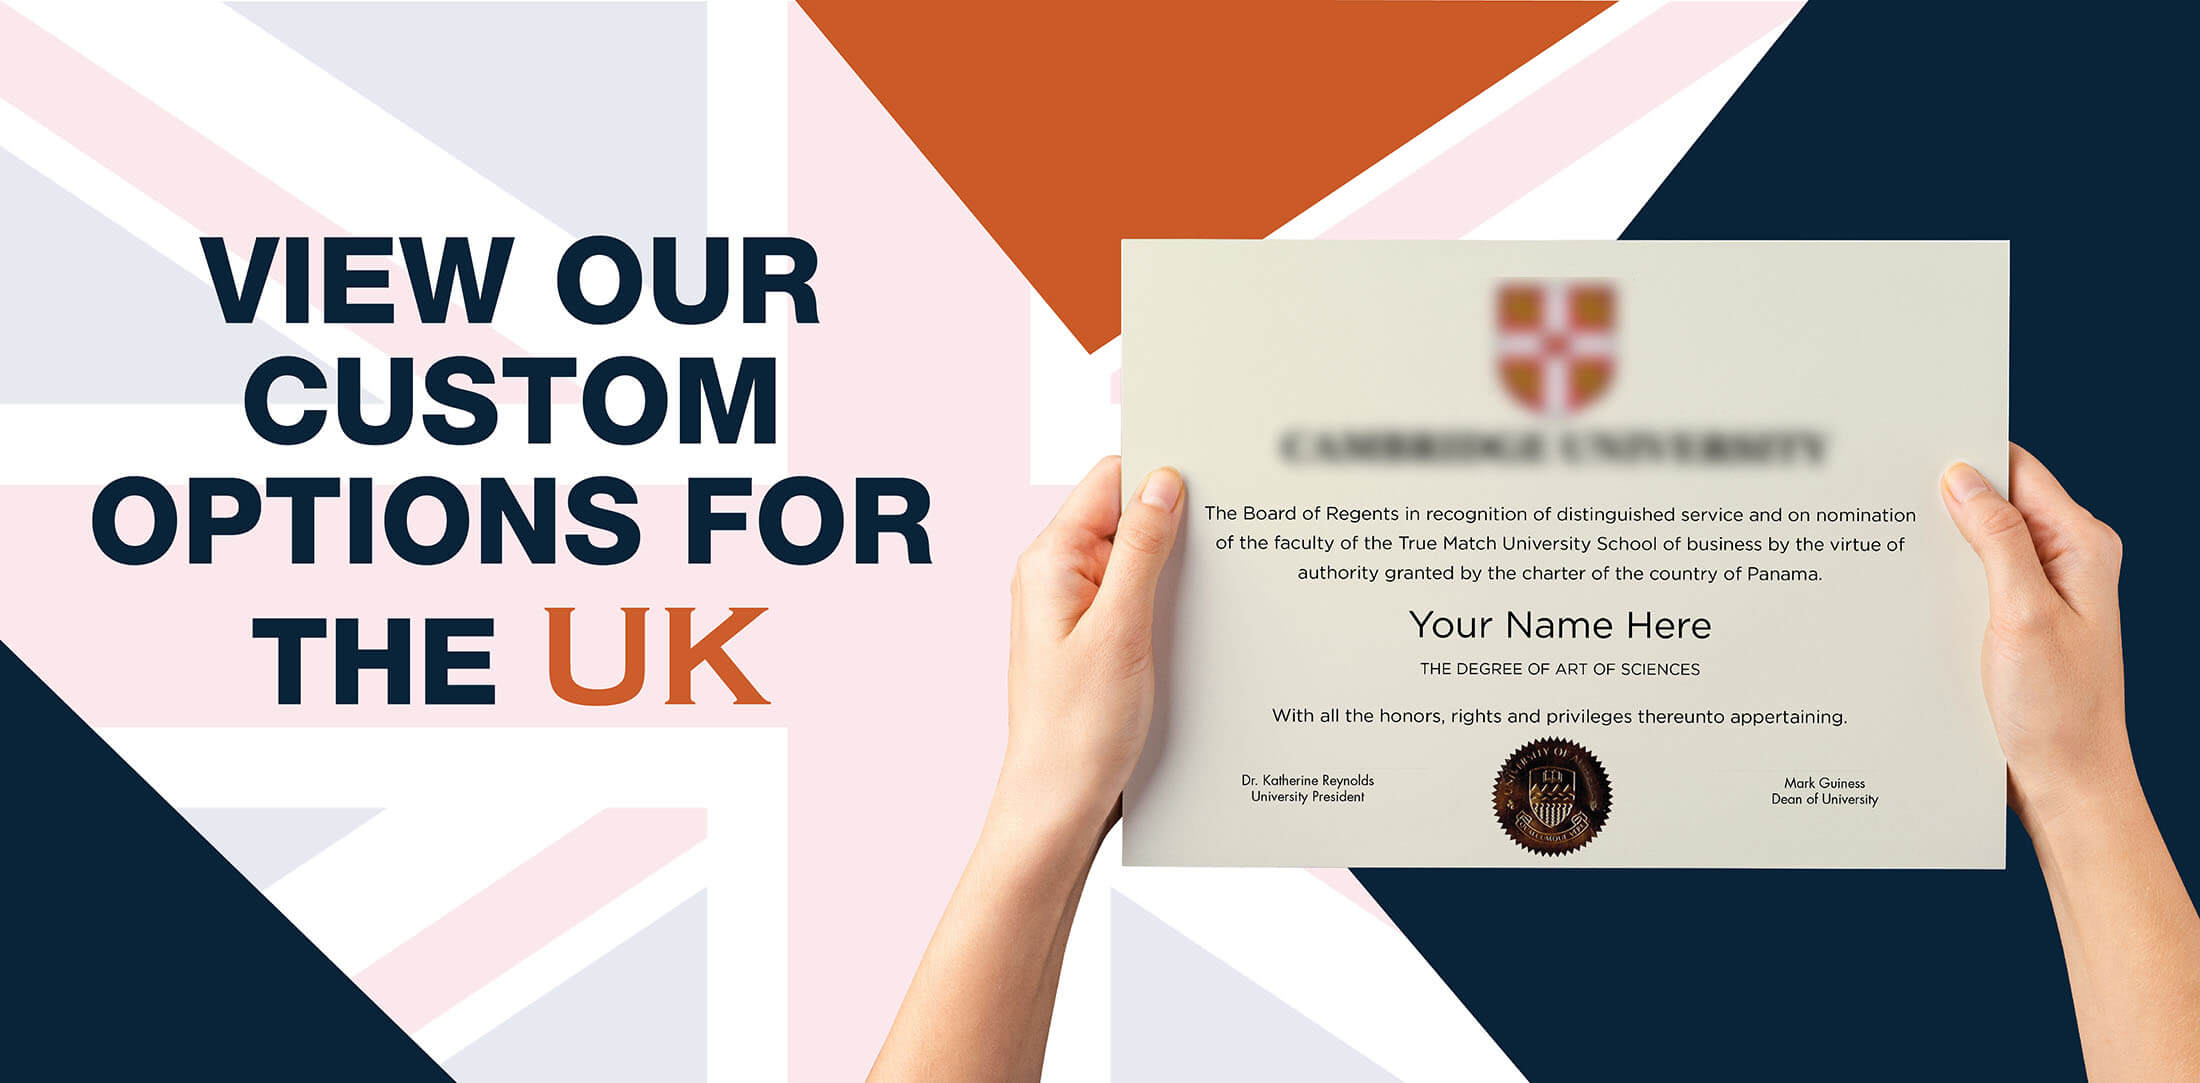 hands holding high quality realistic fake UK degrees from DiplomaCompany.com